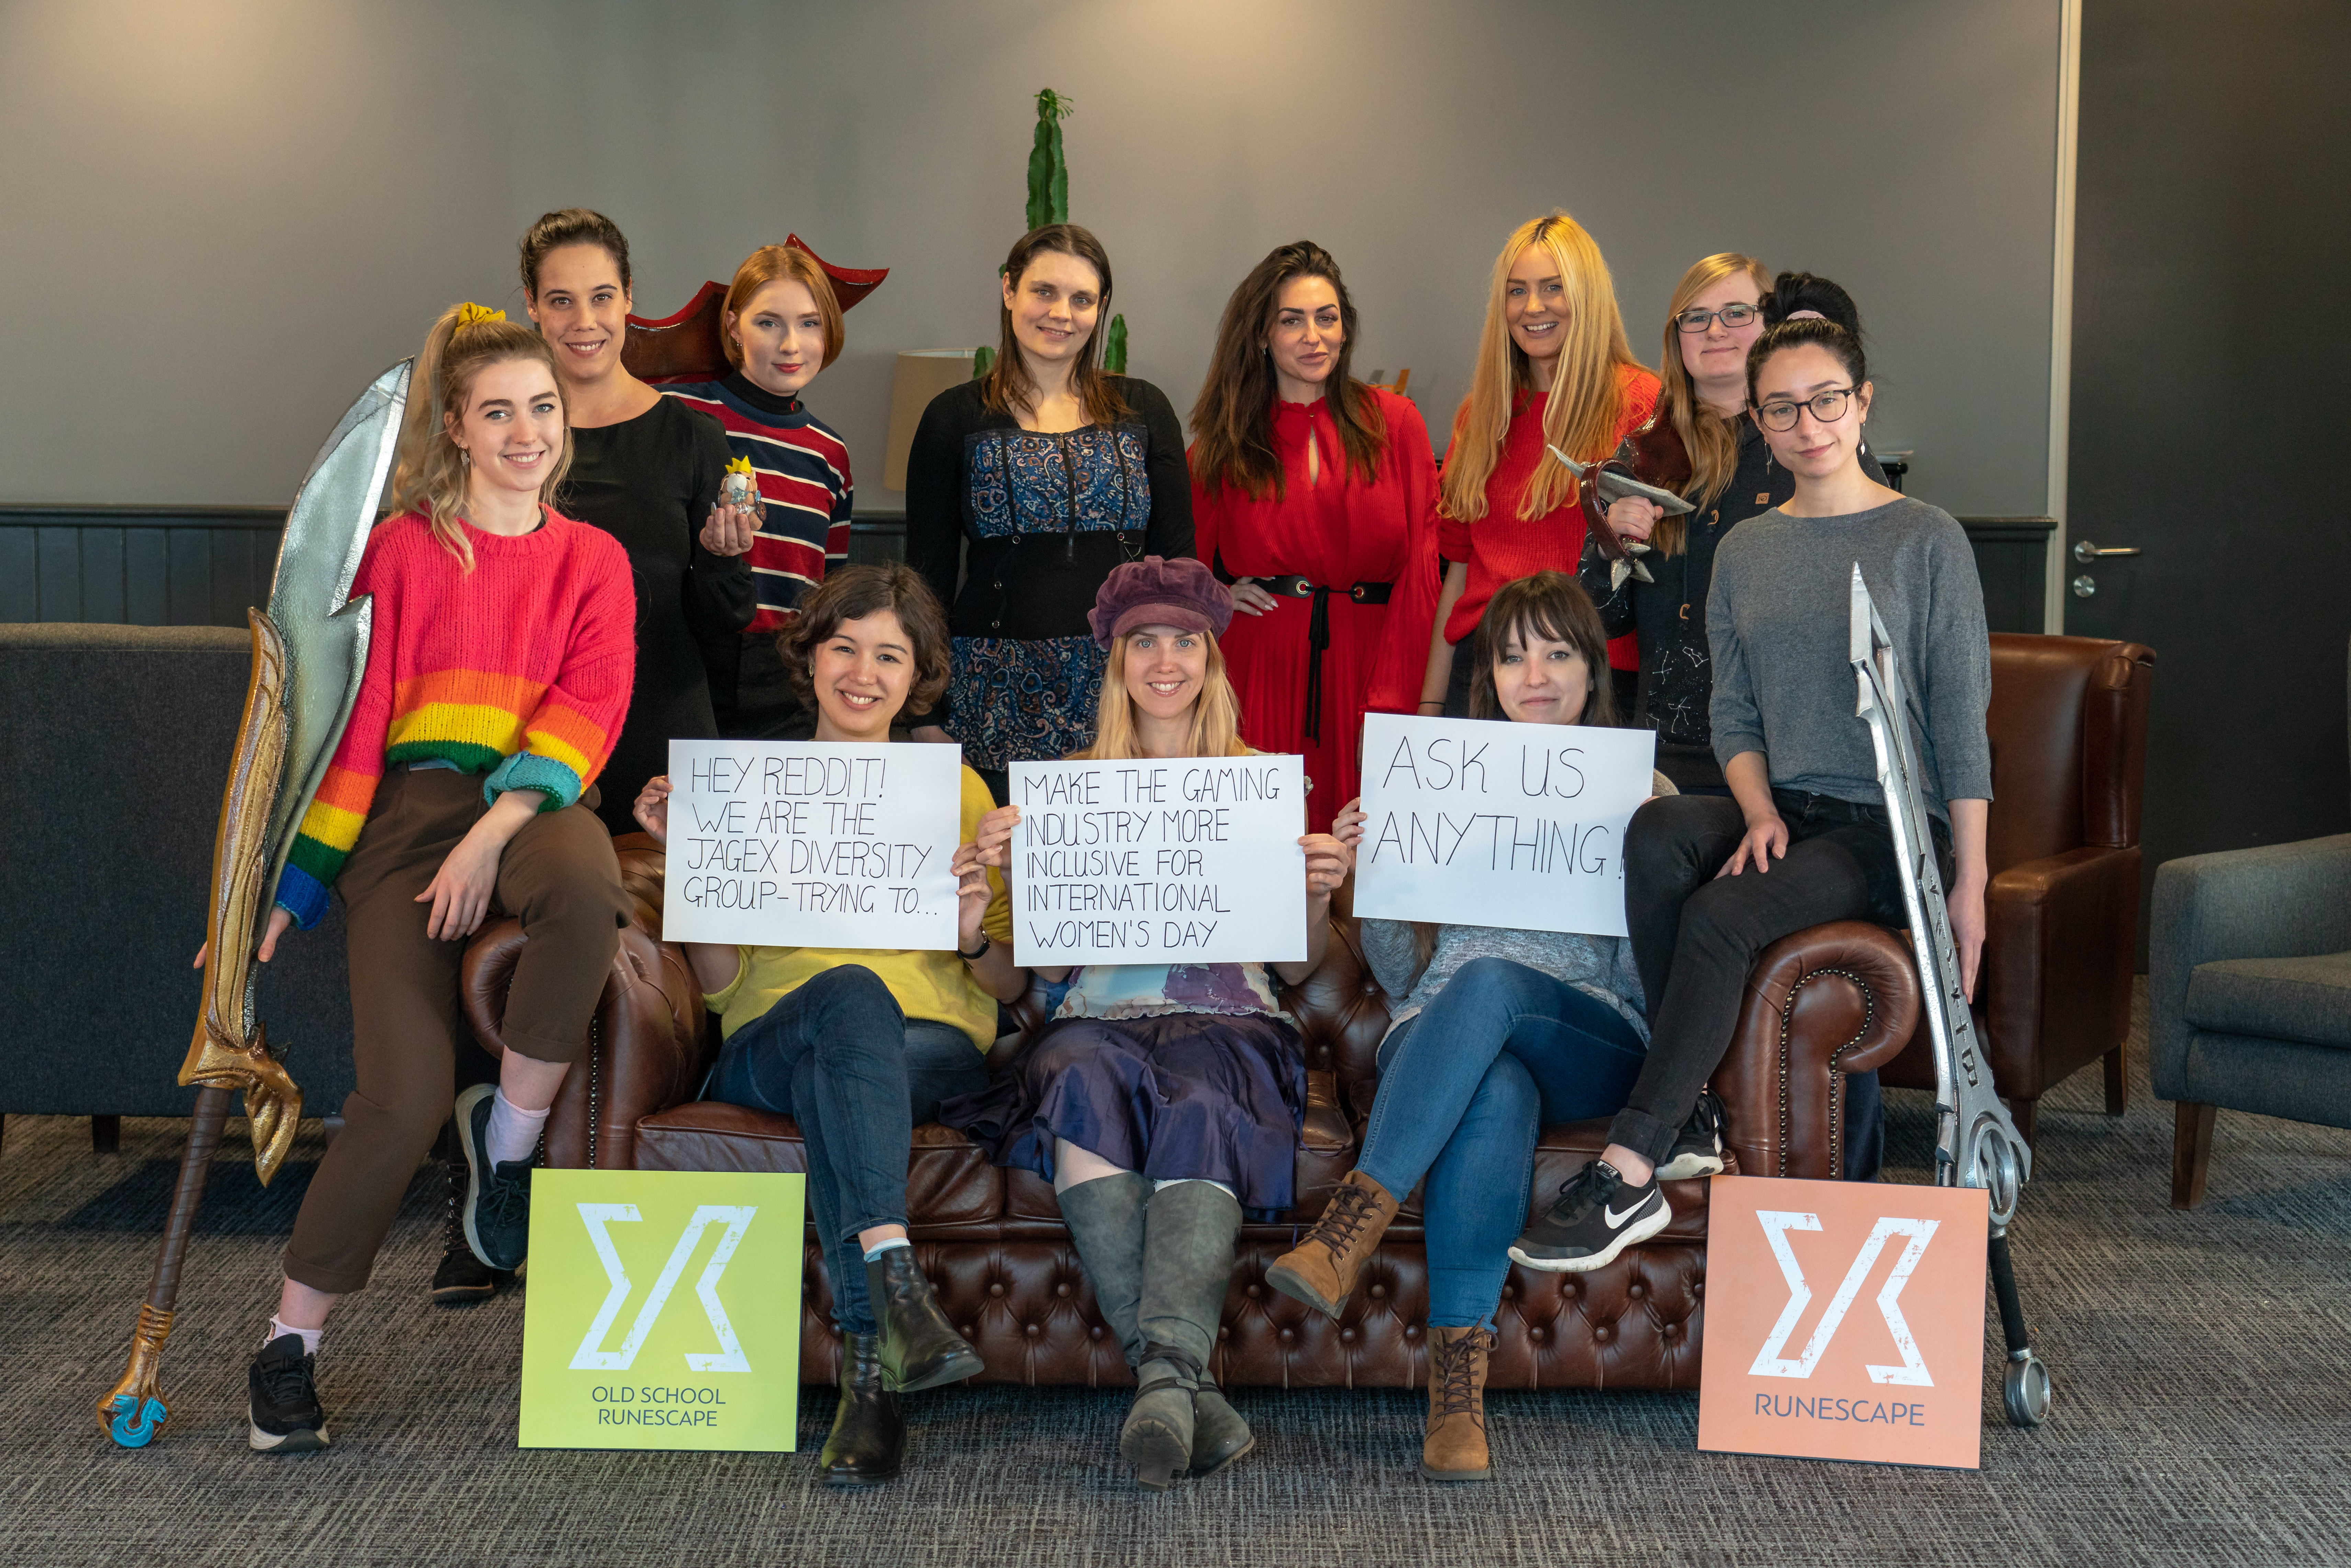 We are women who work at Jagex, the makers of RuneScape and Old School RuneScape. To celebrate International Womens Day 2019 we will be your questions. Ask us anything! : r/IAmA